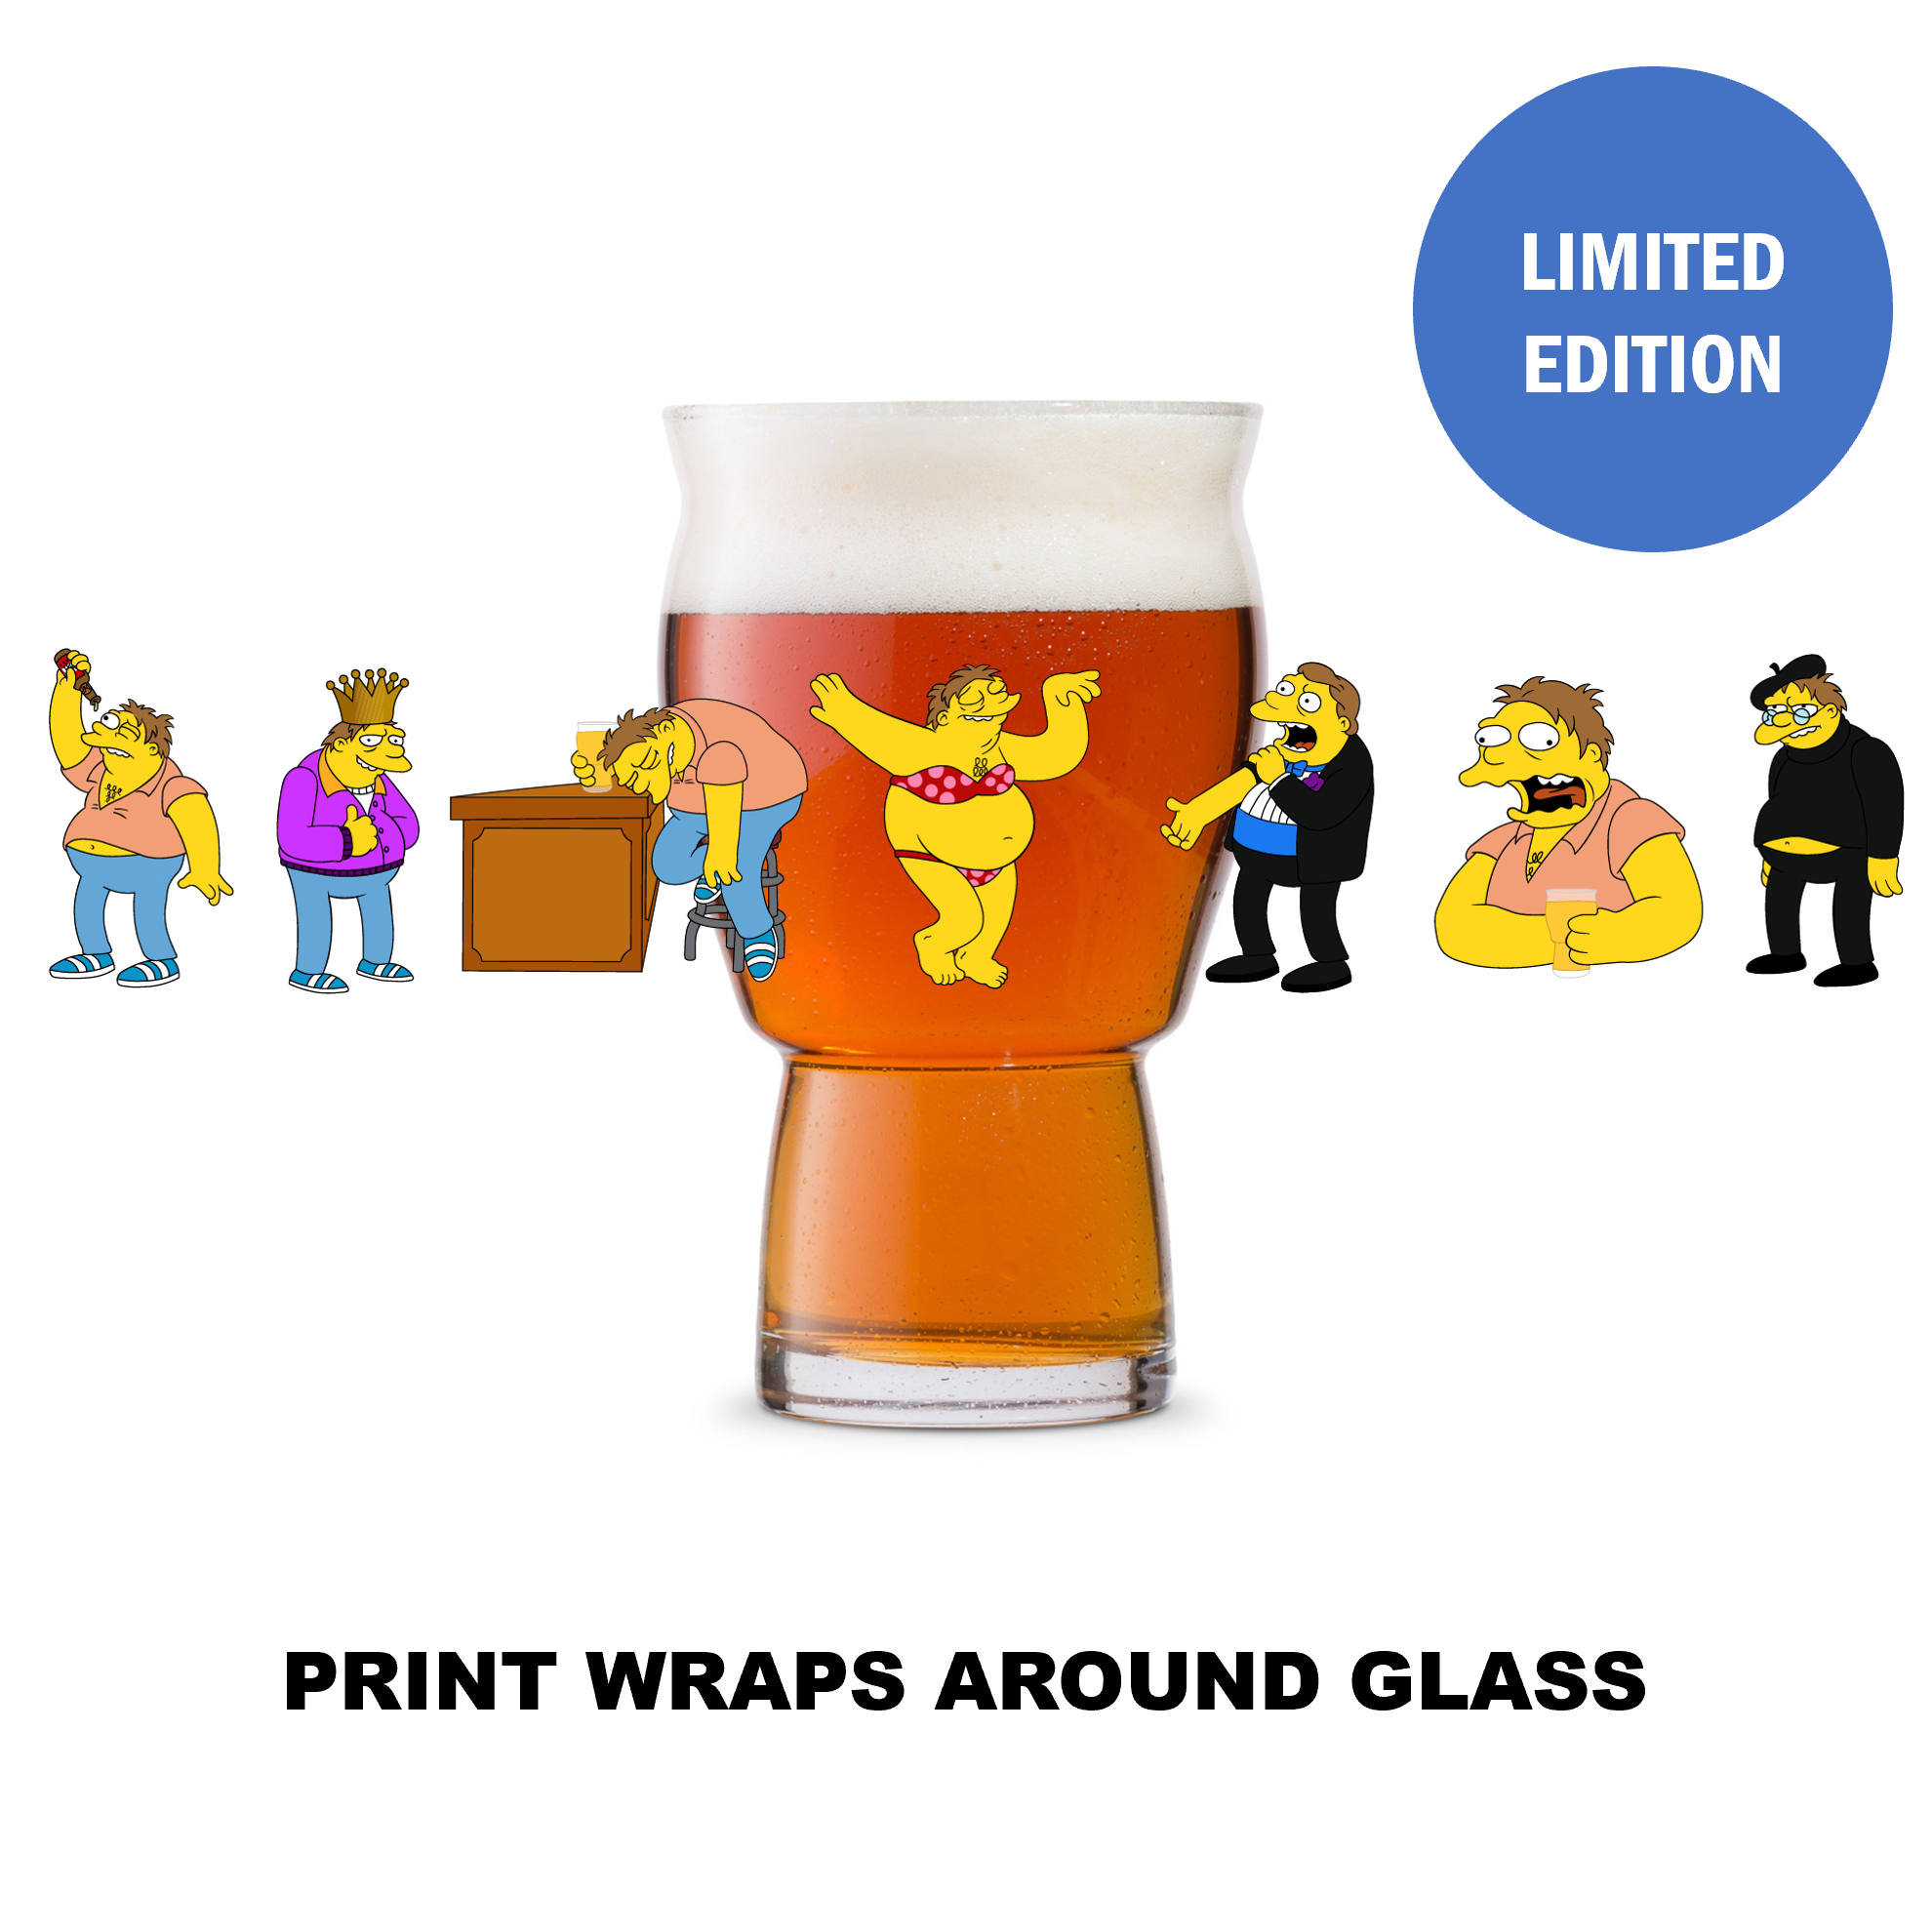 Single Product Image (minor imperfection) "Barney" 16oz glass *LTD EDITION* max 3pp